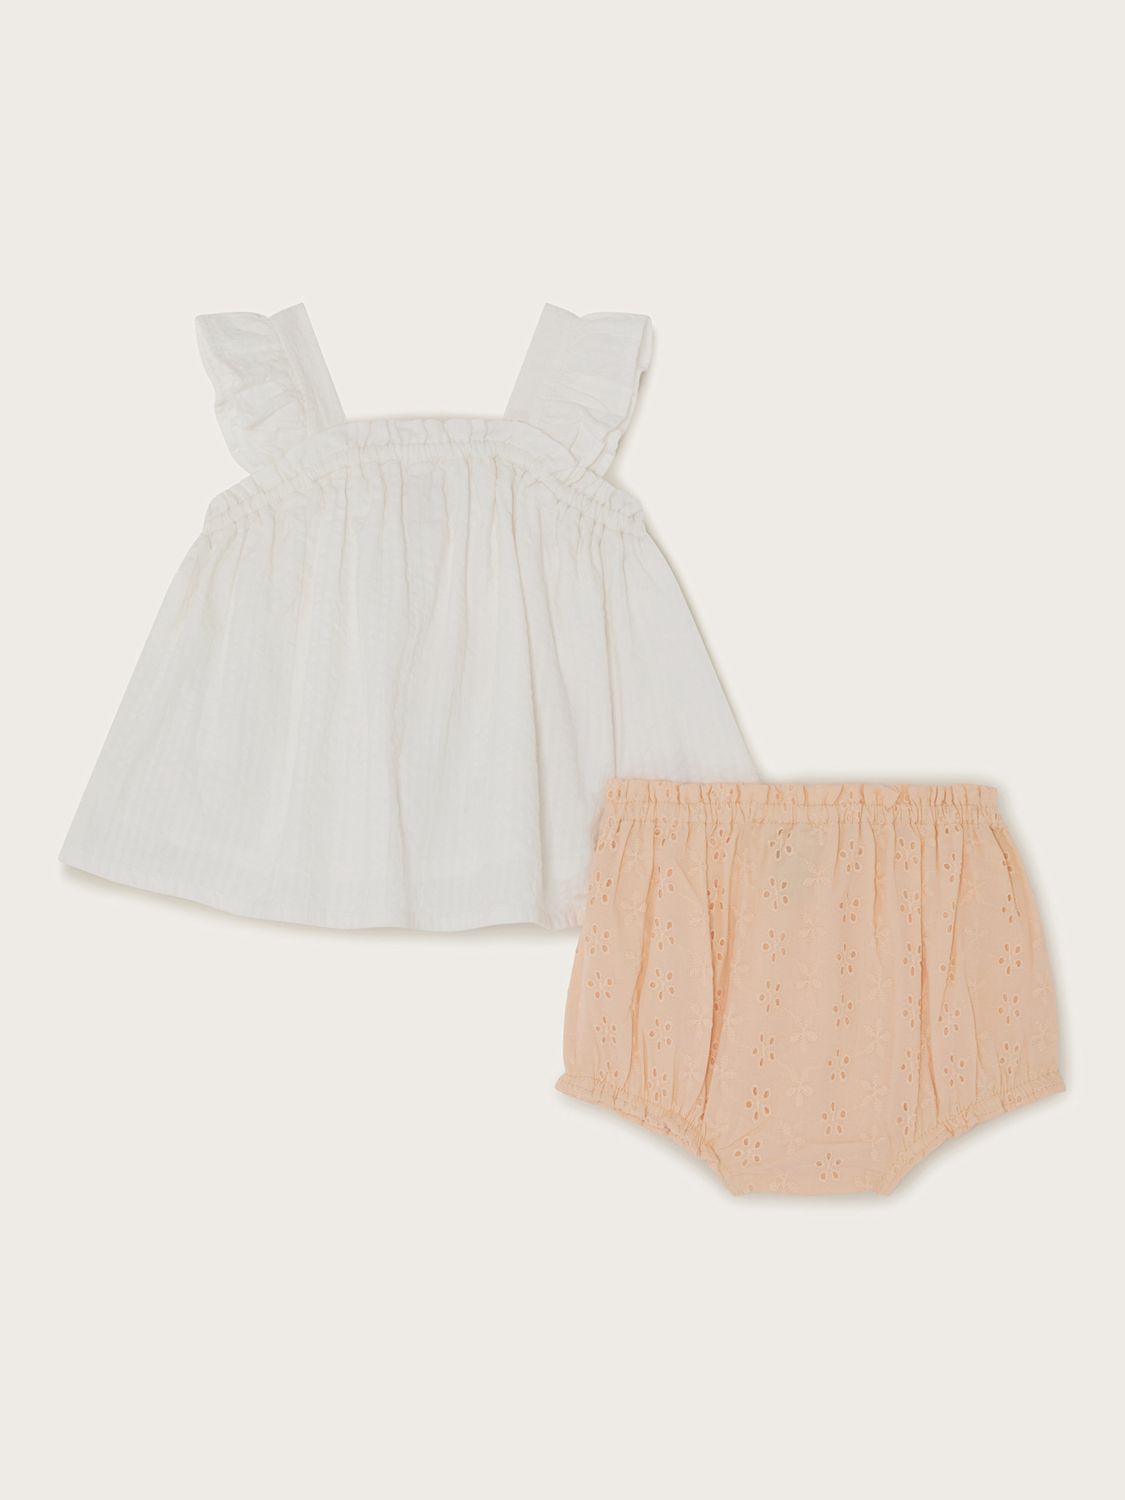 Buy Monsoon Baby Sunflower Embroidered Top & Broderie Bloomer Shorts Set, Ivory/Multi Online at johnlewis.com